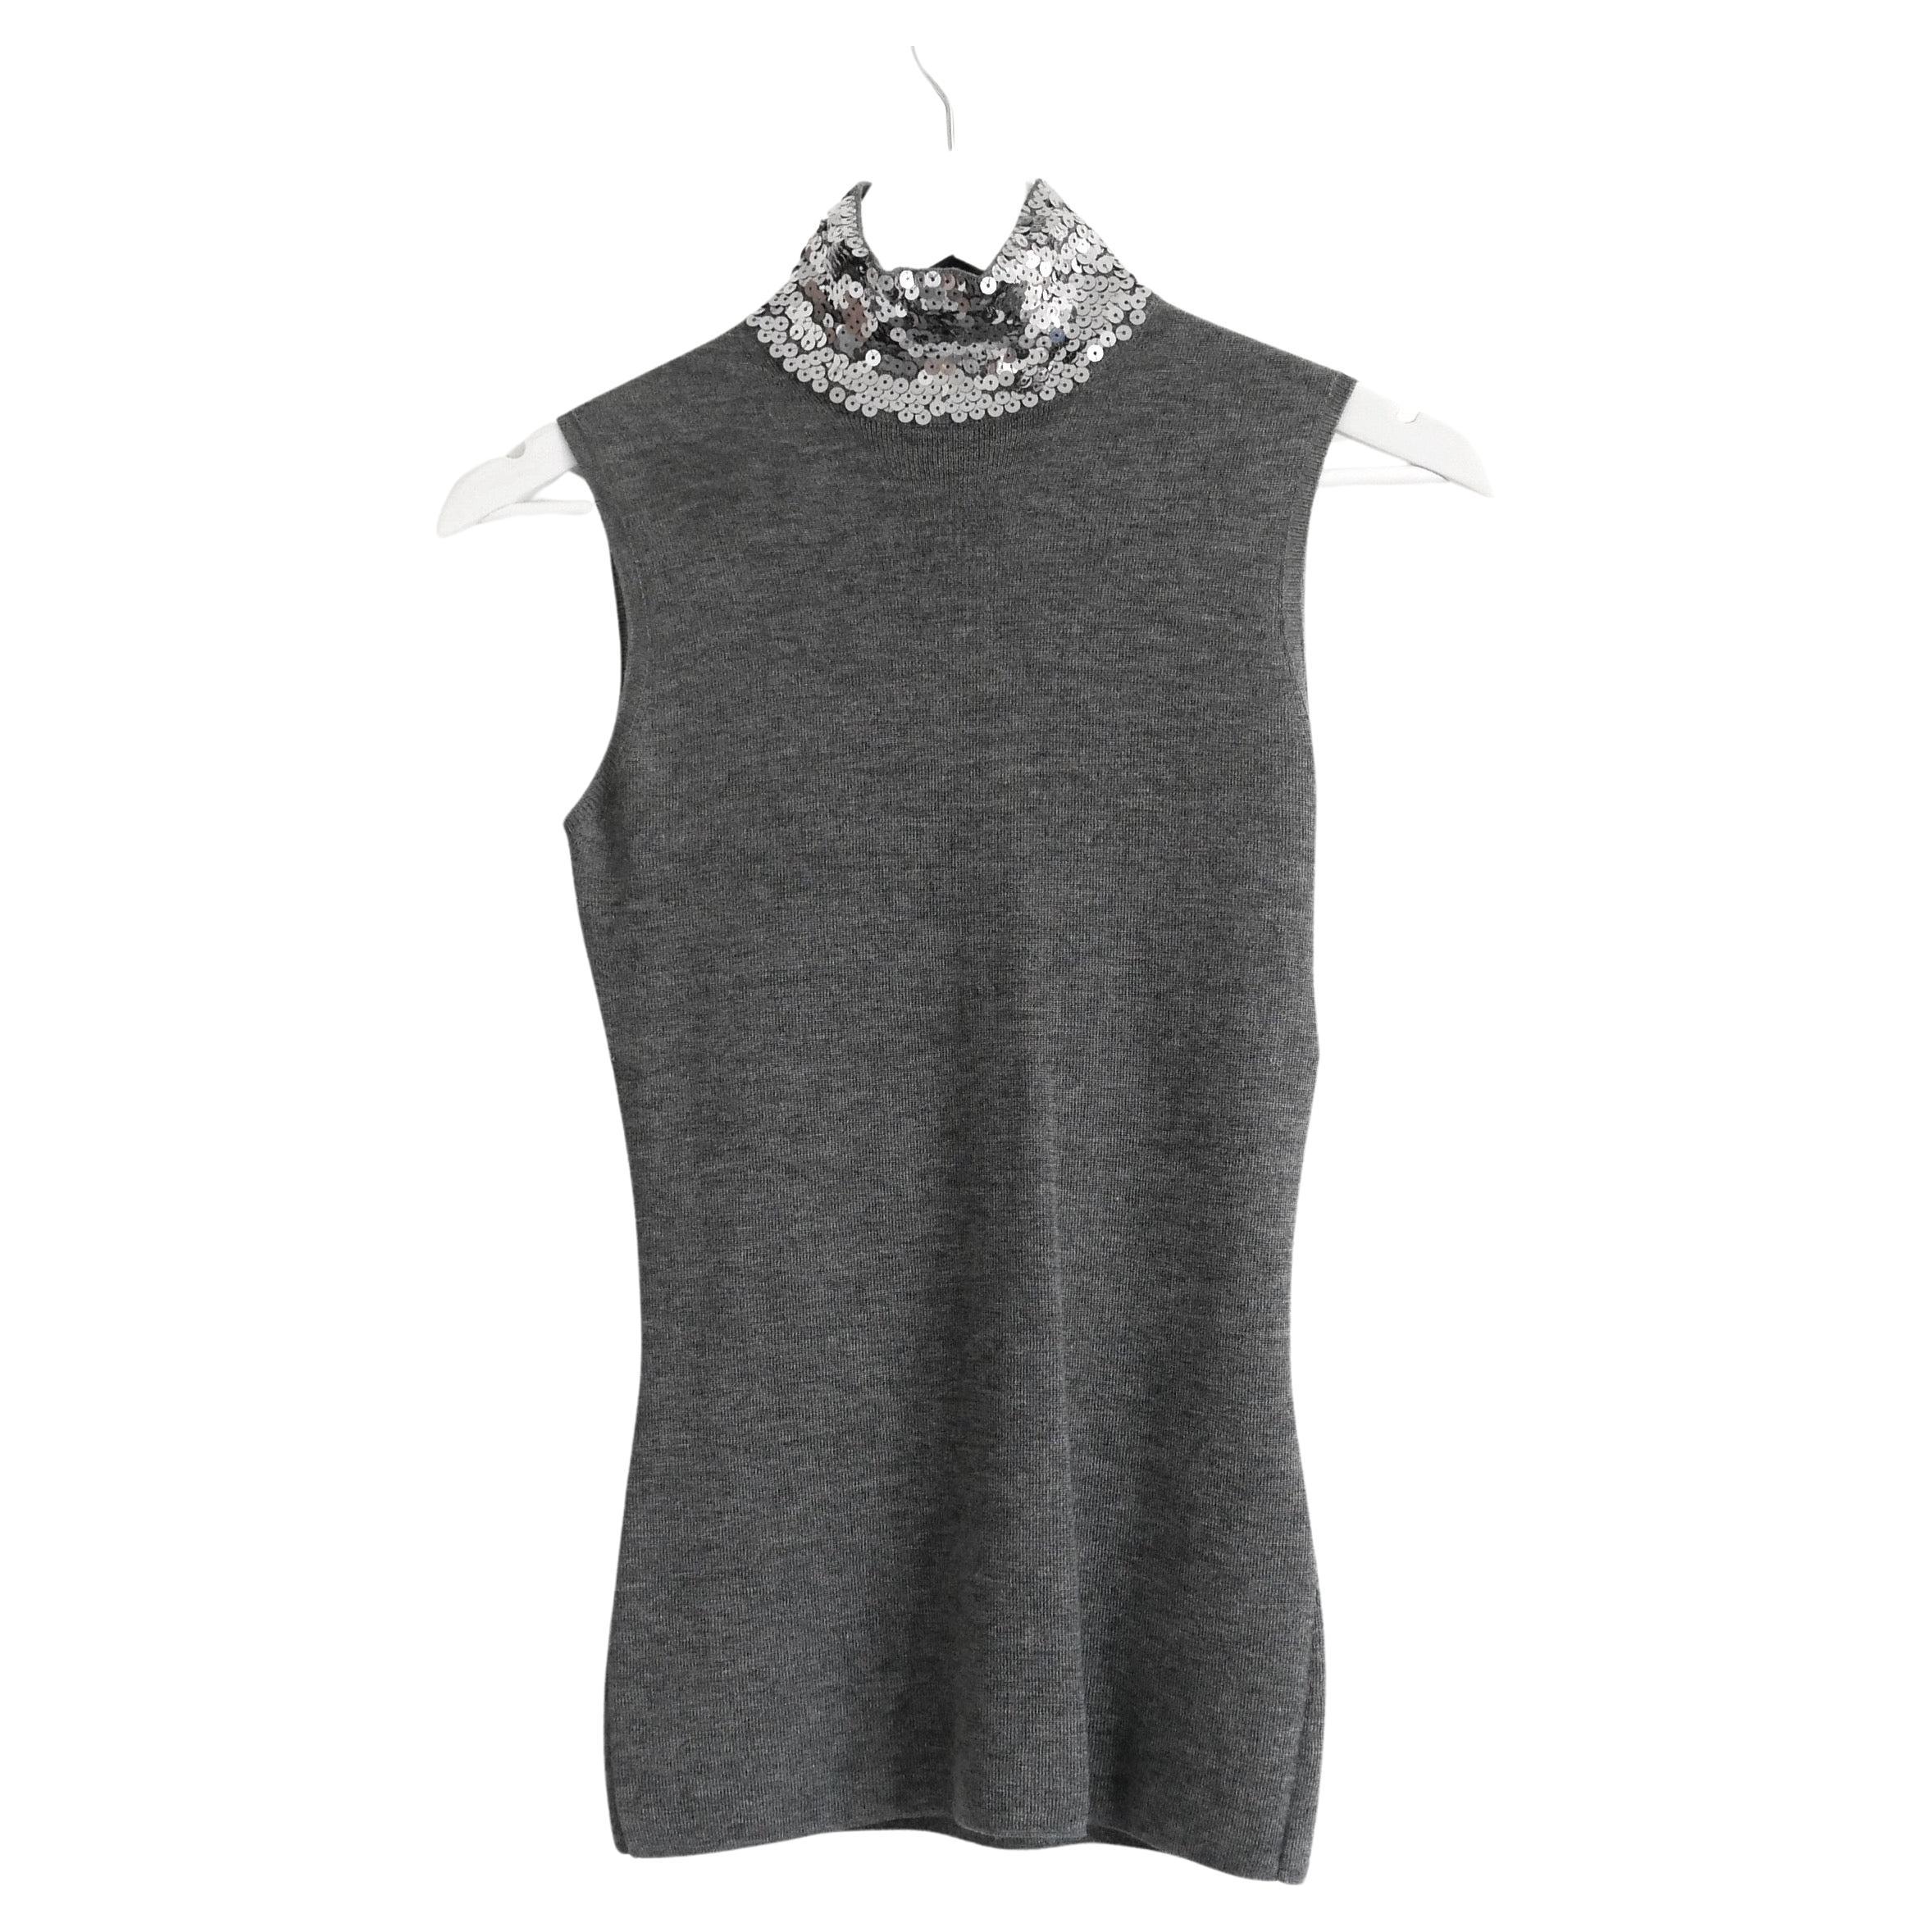 Dior x Raf Simons Pre-Fall 2015 Sequin High Neck Sleeveless Sweater  For Sale